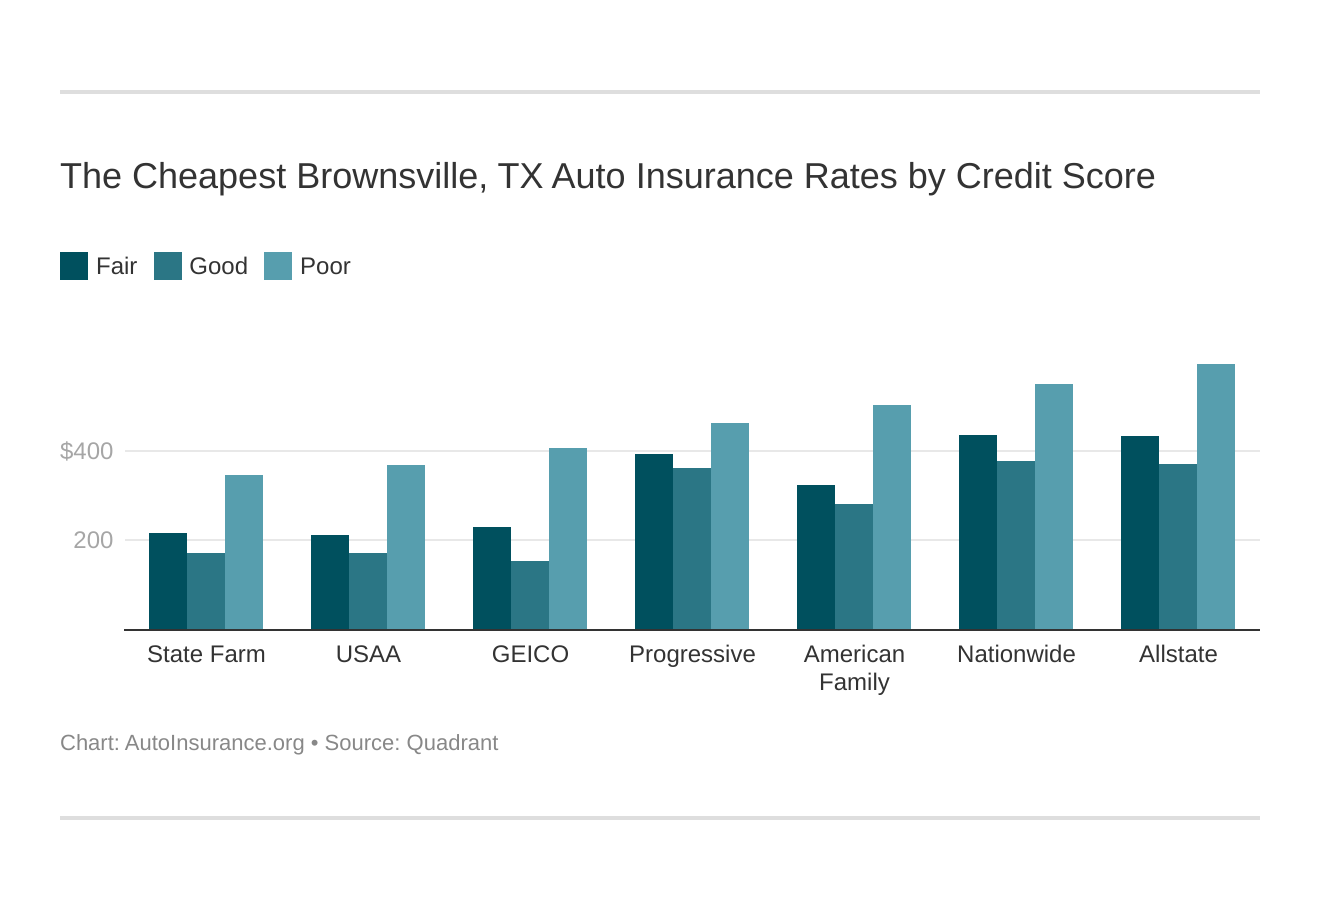 The Cheapest Brownsville, TX Auto Insurance Rates by Credit Score